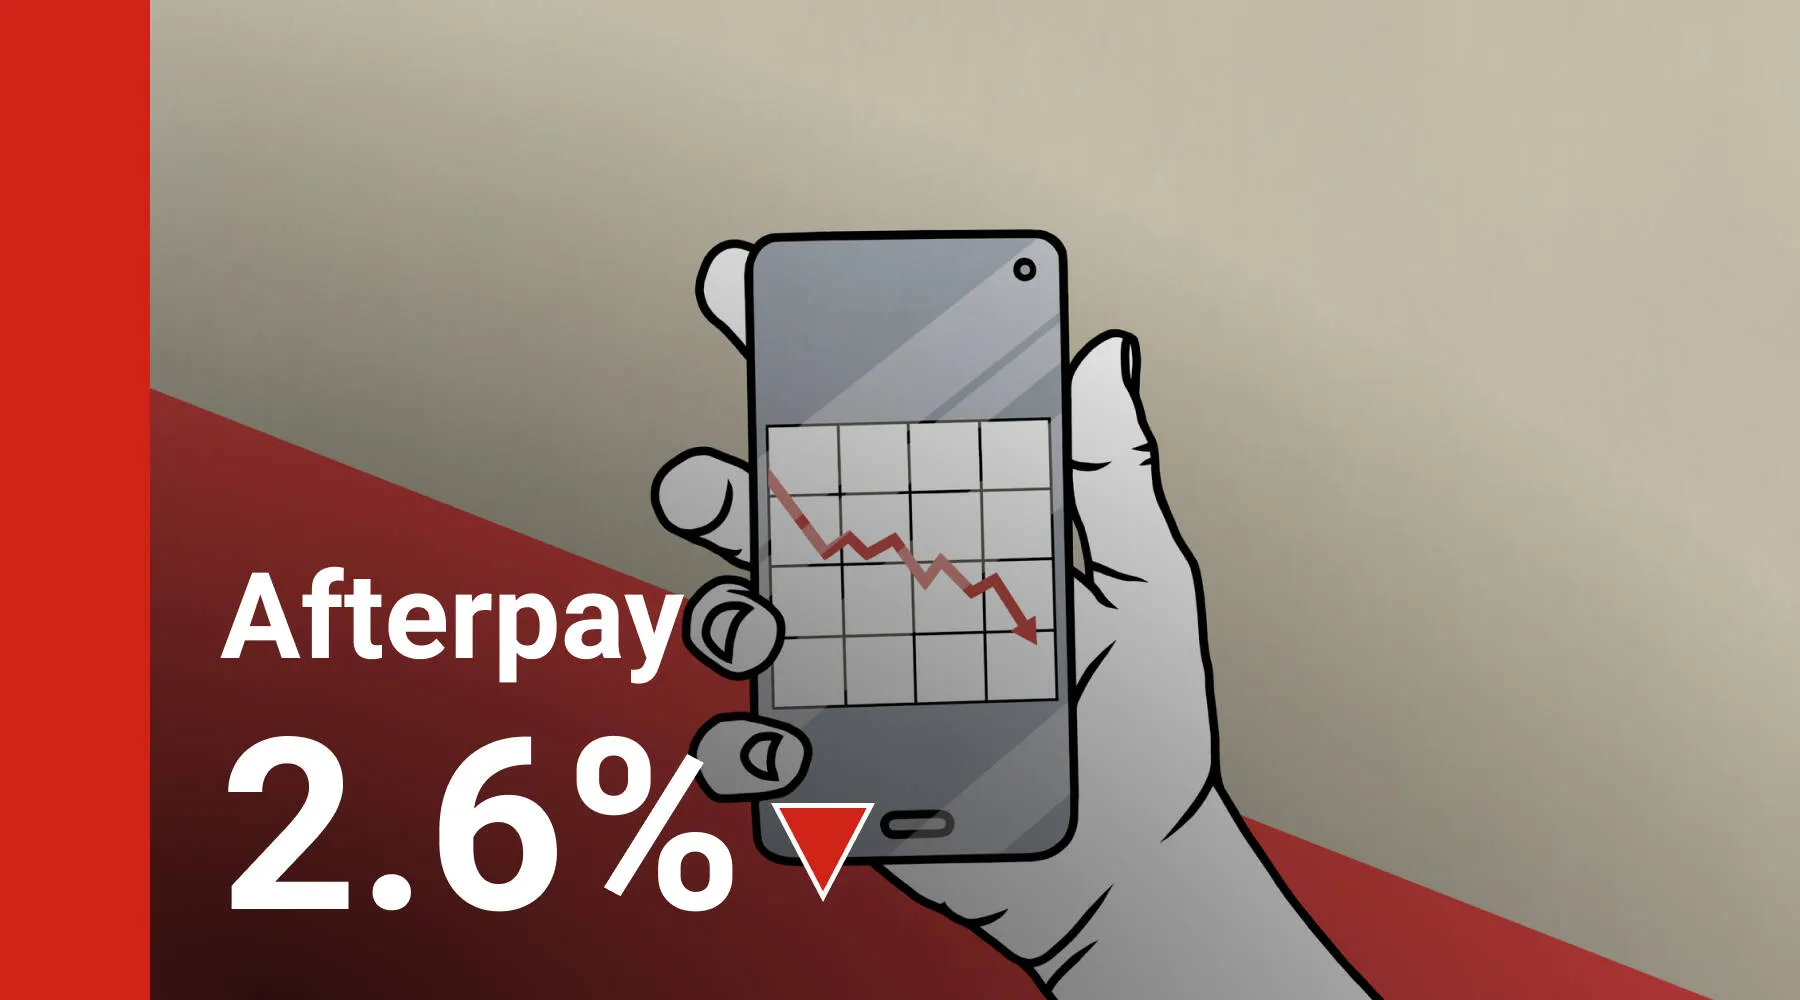 Why has the Afterpay (APT) share price been sliding?